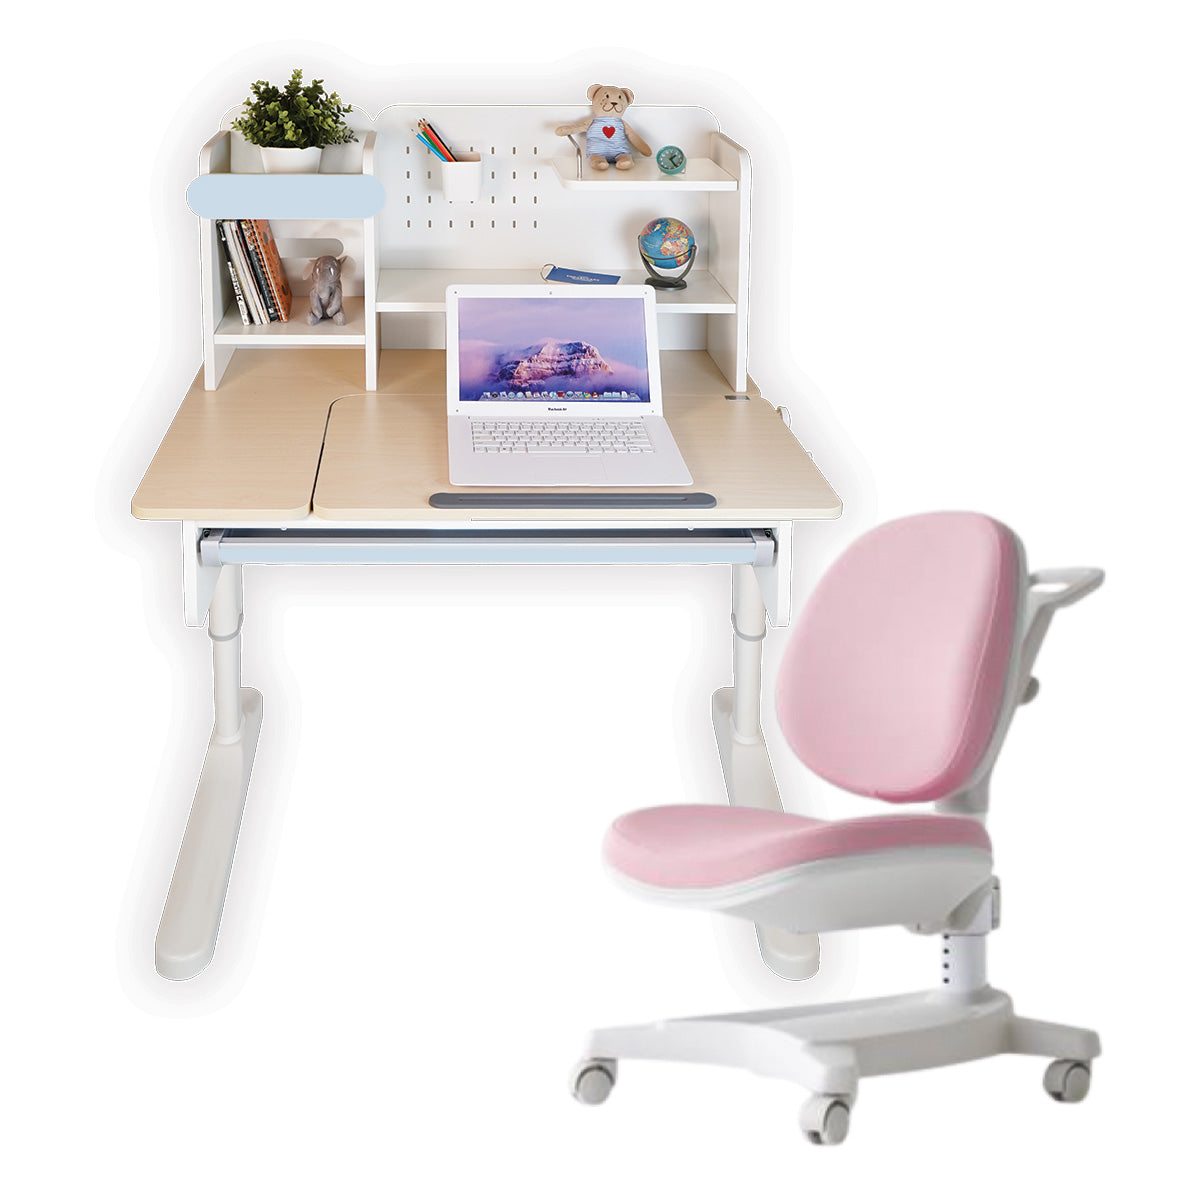 Impact Ergo-Growing Study Desk And Chair Set - IM-G1000A-BL (Ready Stocks)